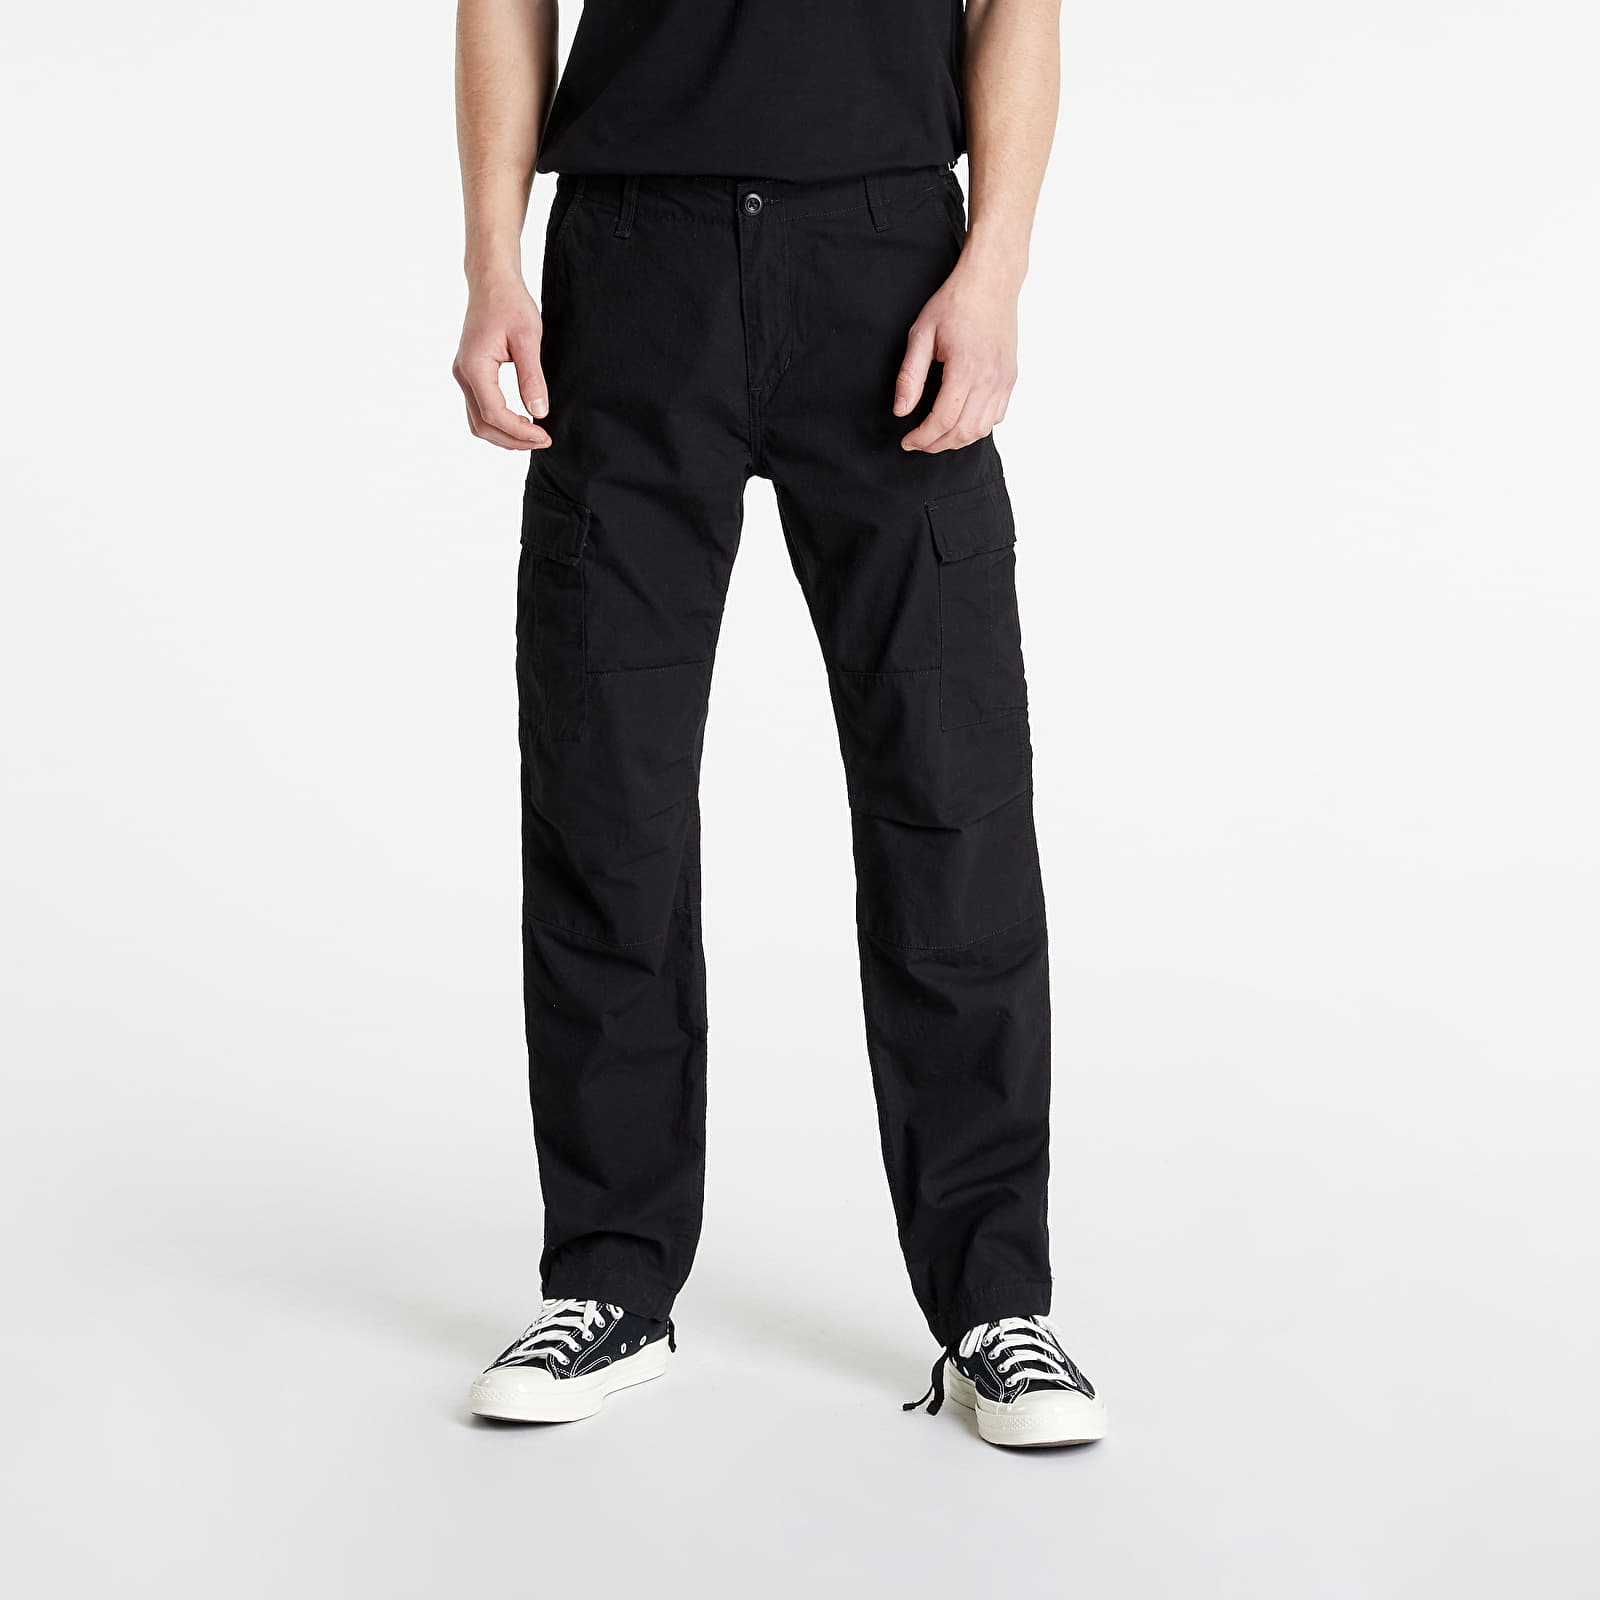 Pants and jeans Carhartt WIP Aviation Pant Black